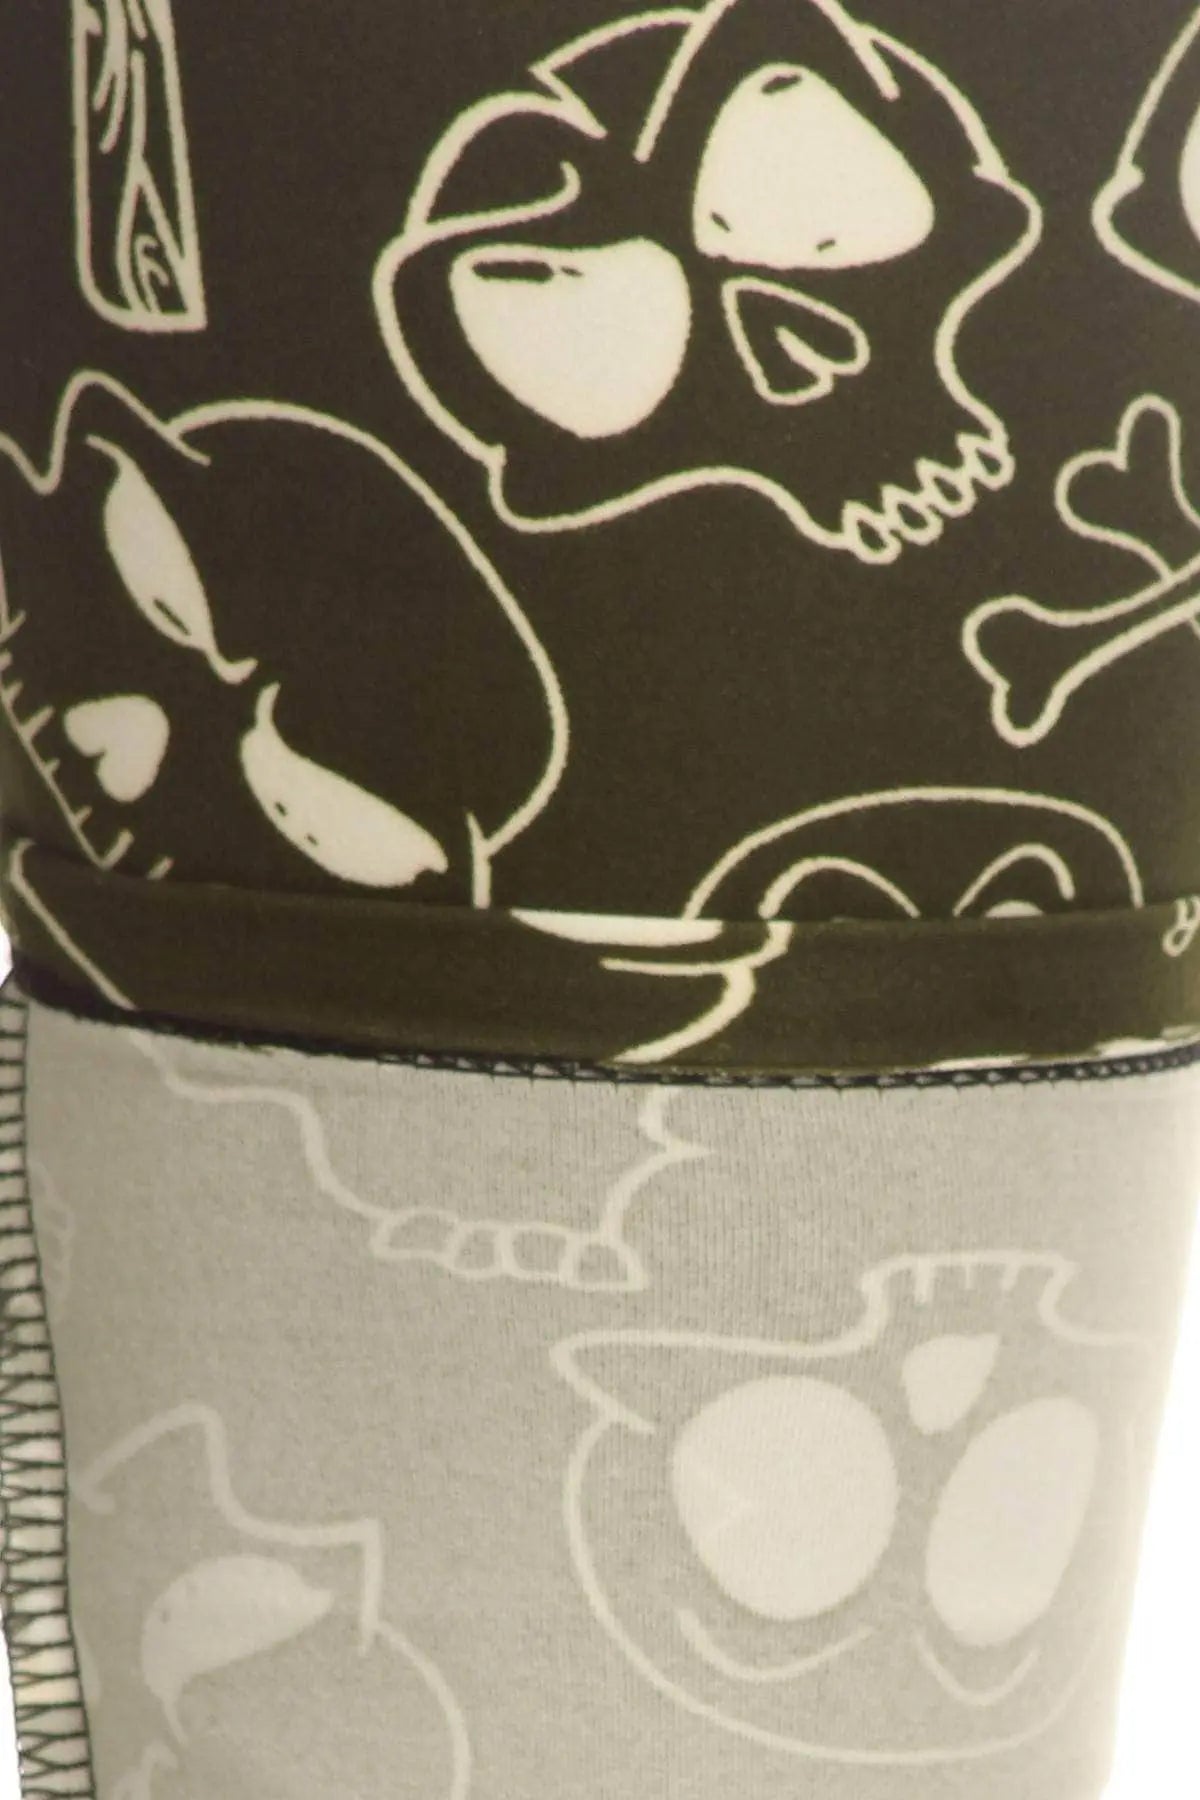 Skulls And Bones Graphic Printed Knit Legging With Elastic Waist Detail. High Waist Fit. Blue Zone Planet